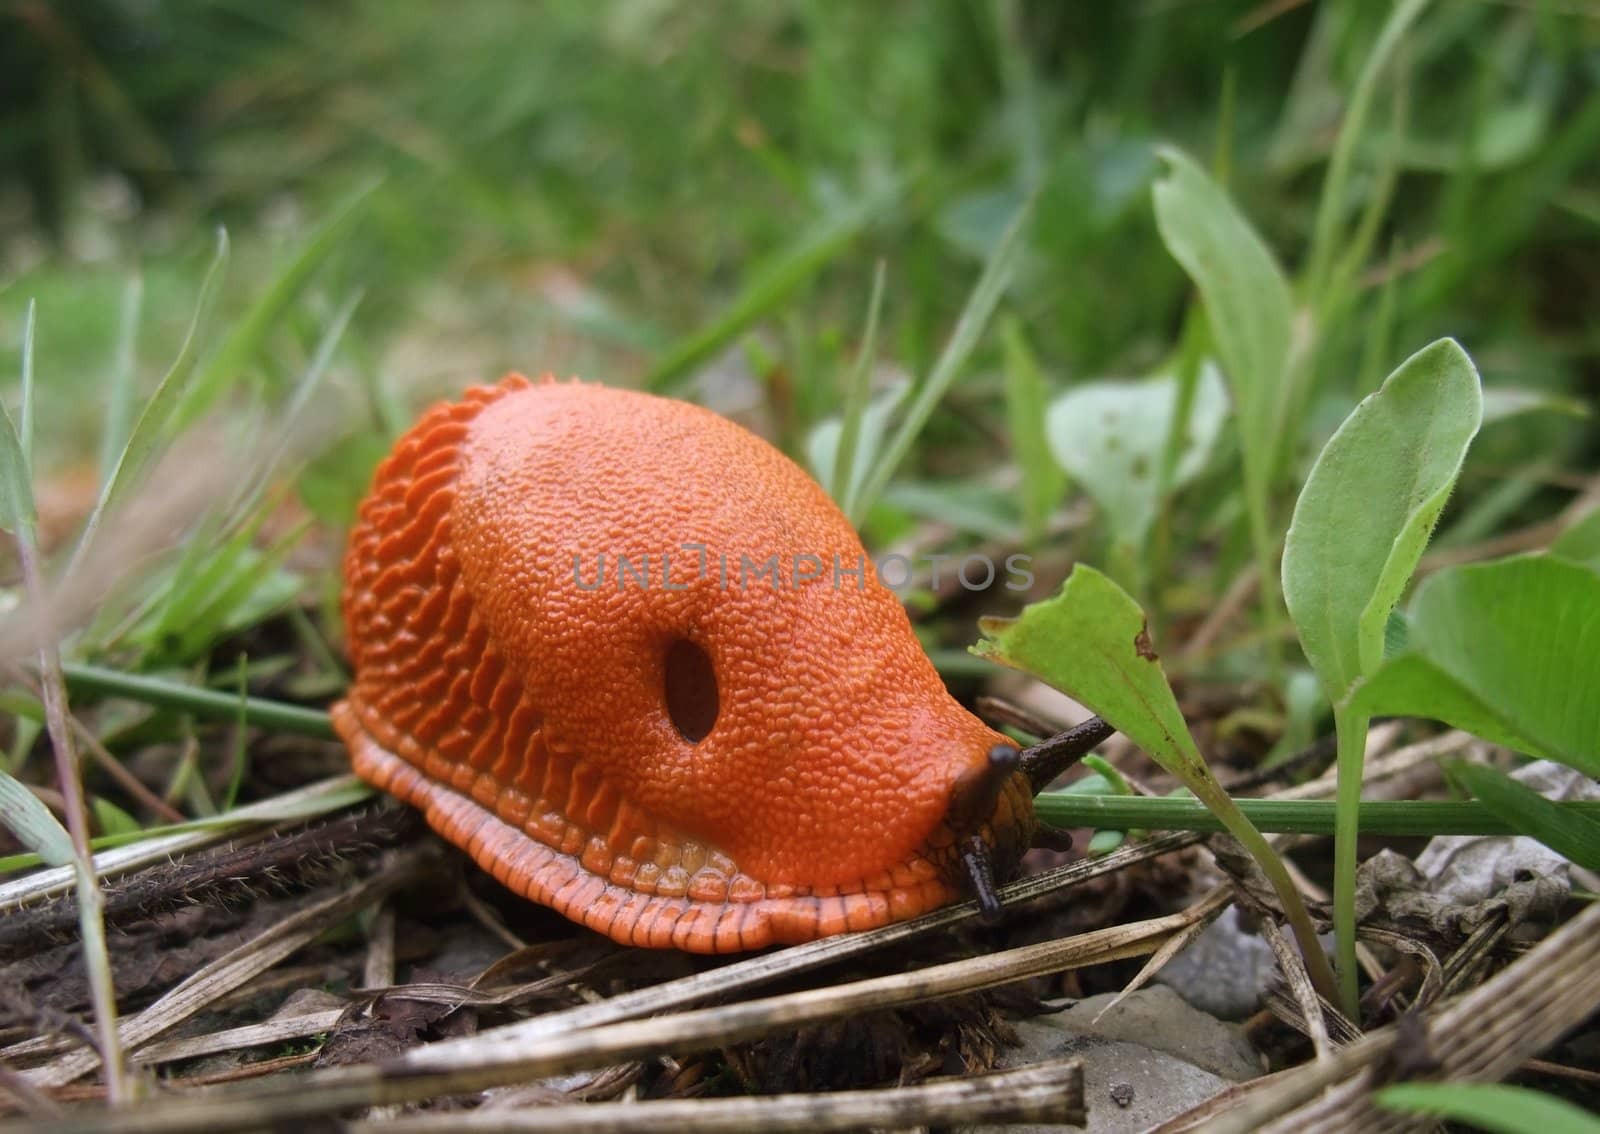 surface shot of a red slug while creeping on the ground in green back